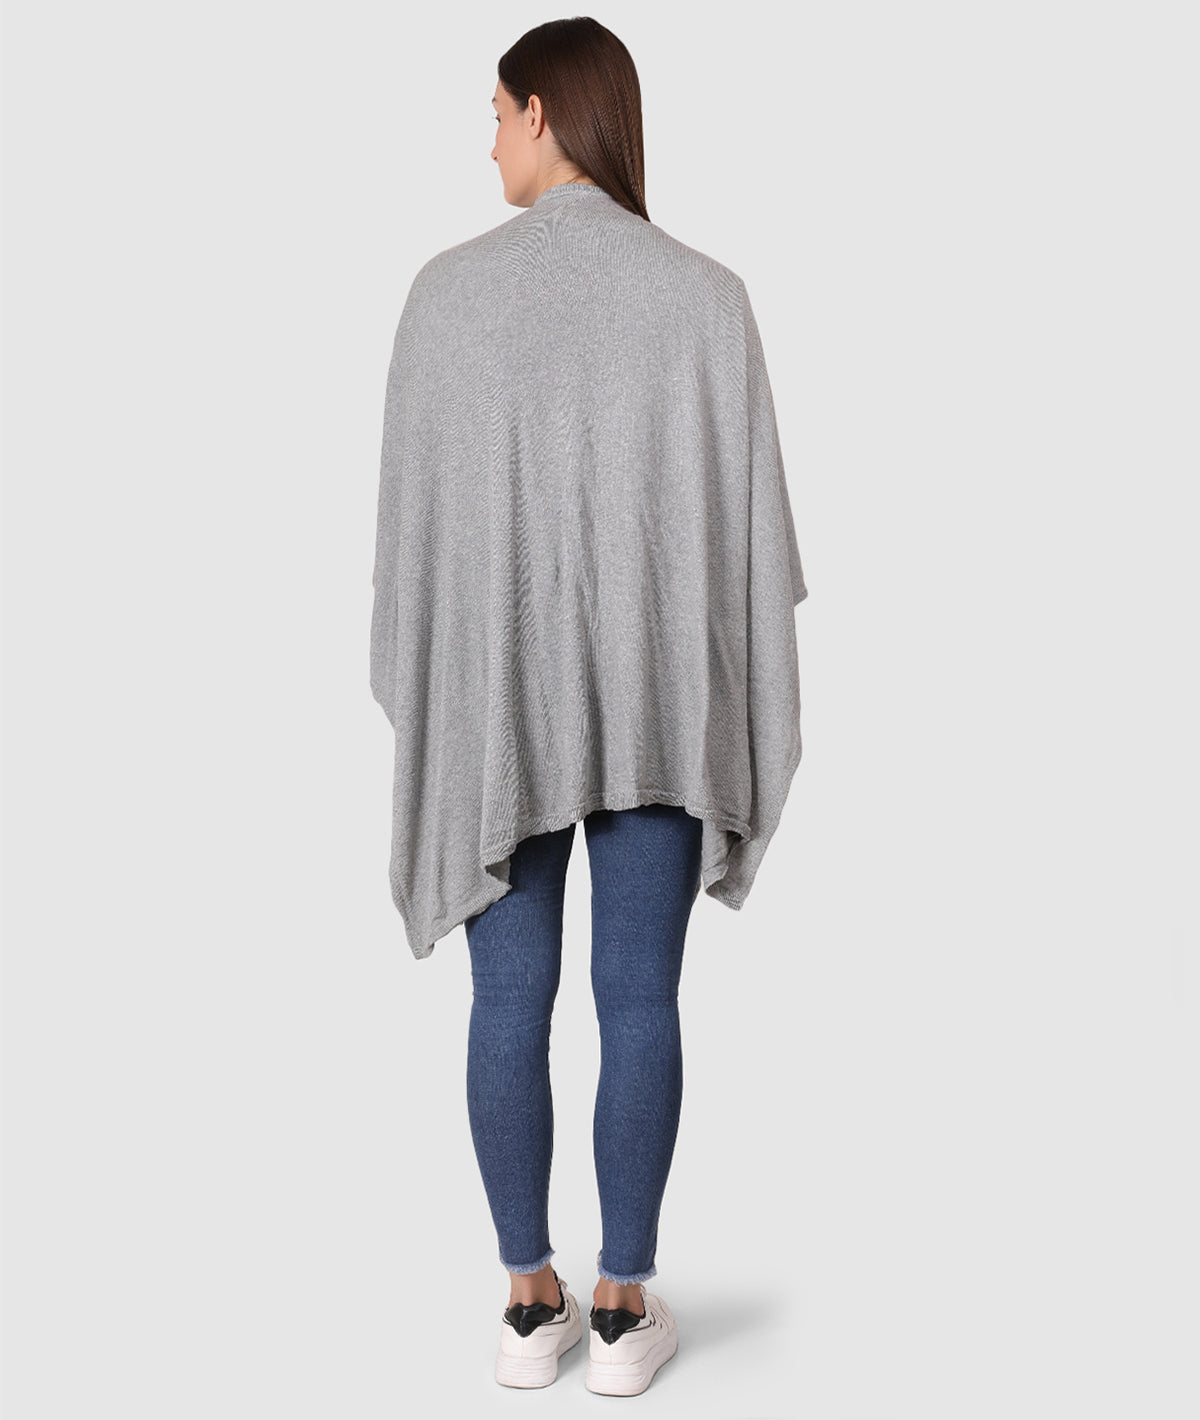 Classic Travel cape Wrap - Organic Cotton Knitted Light Weight Wrap in Pouch (Light Grey Melange )